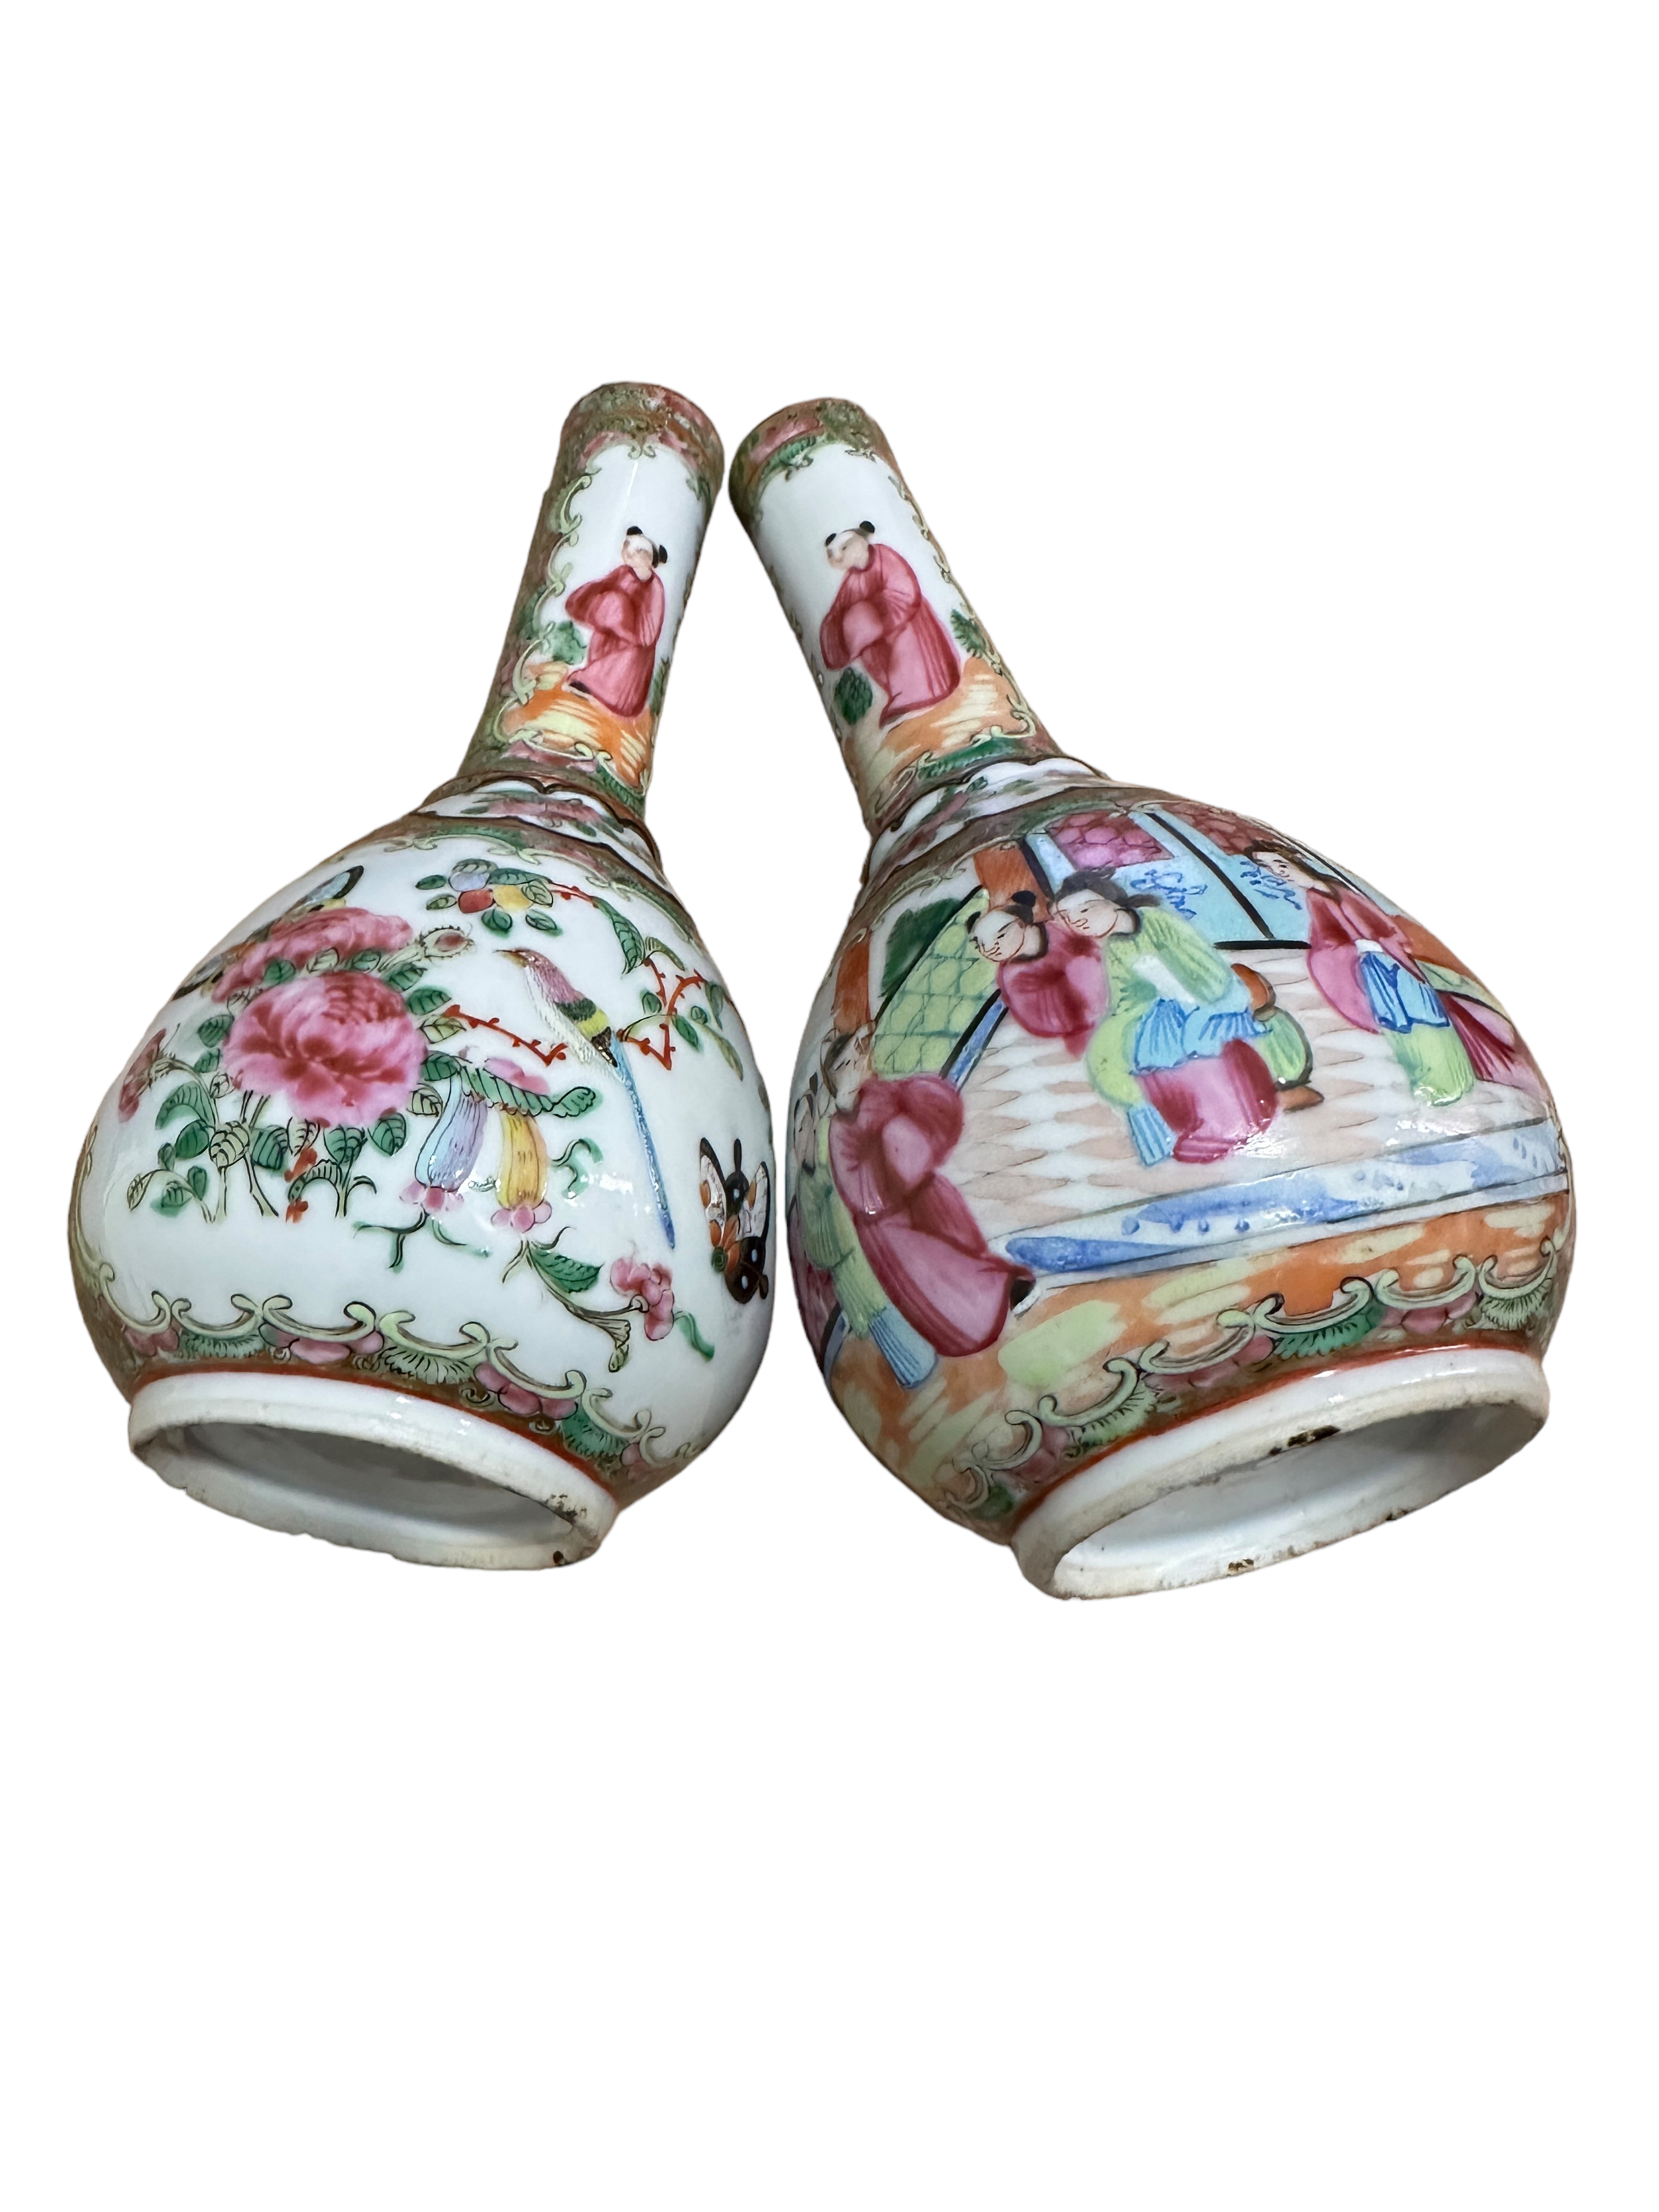 Pair of Antique Chinese Export Famille Rose Bottle Vases 20.3cm tall - diameter 10cm wides. - Image 2 of 9